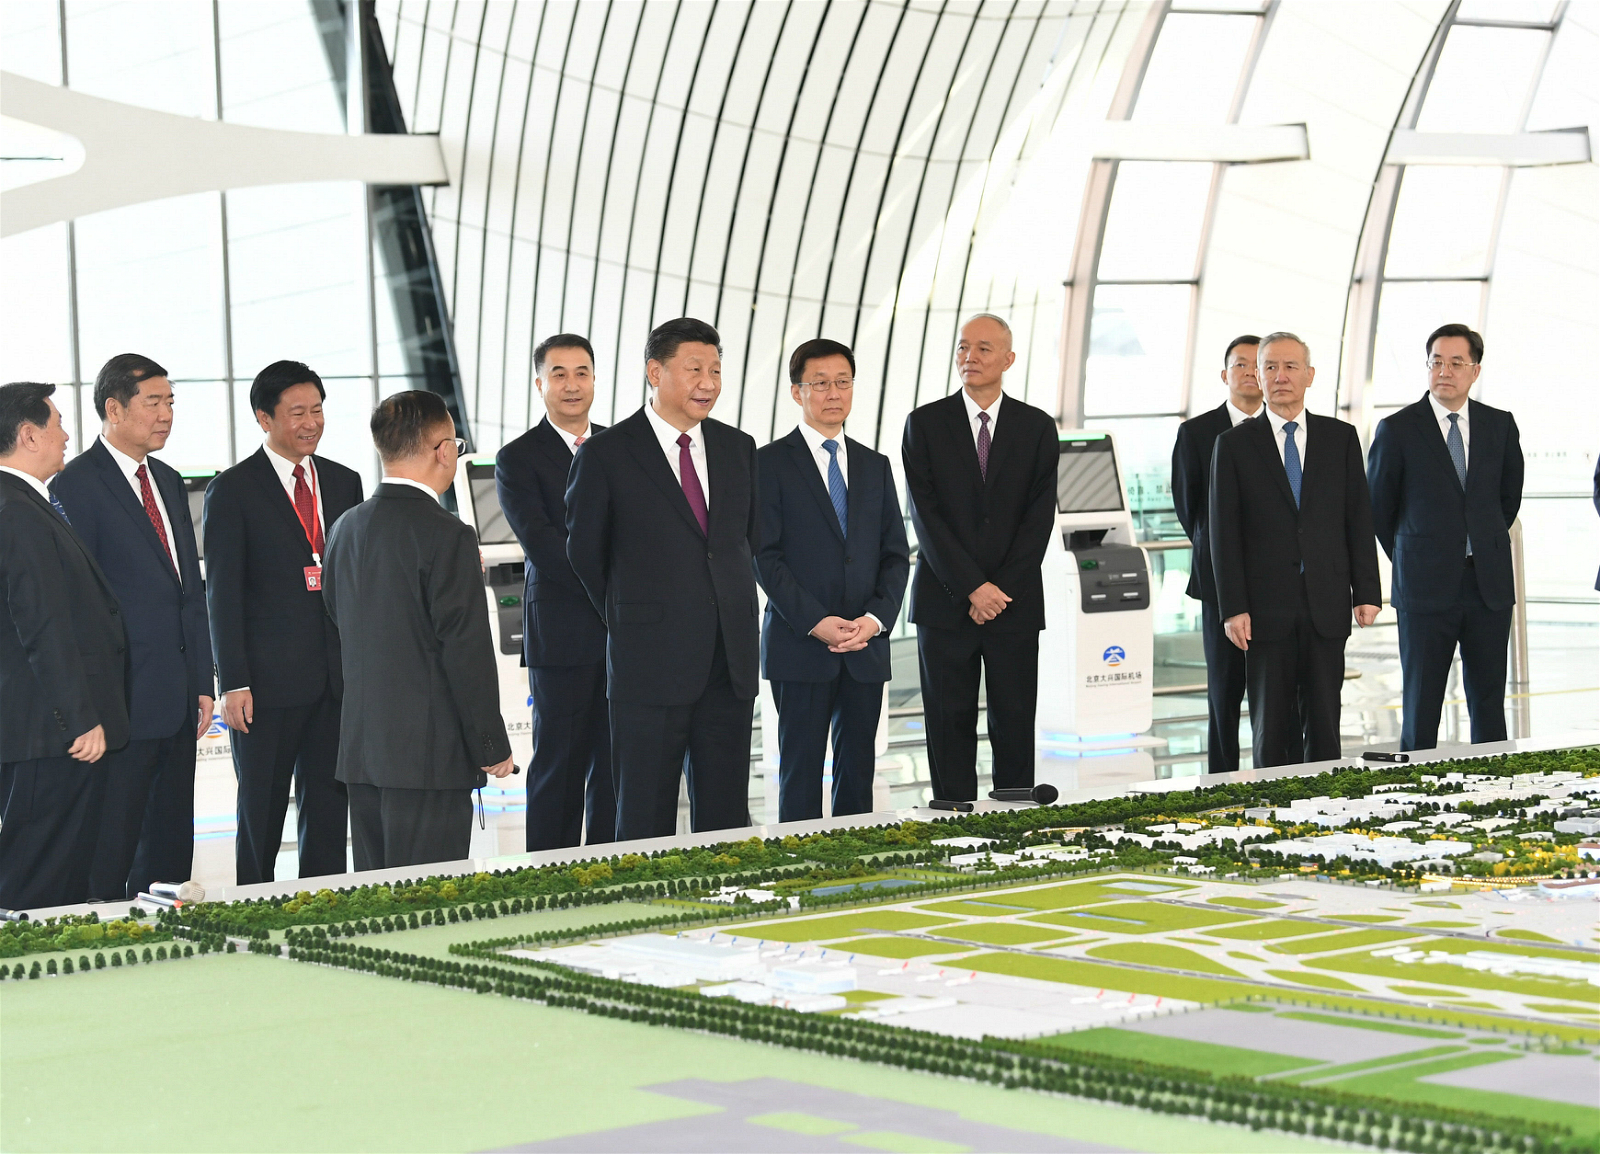 Xi Jinping on the opening day of Beijing Daxing airport (Image: Alamy)